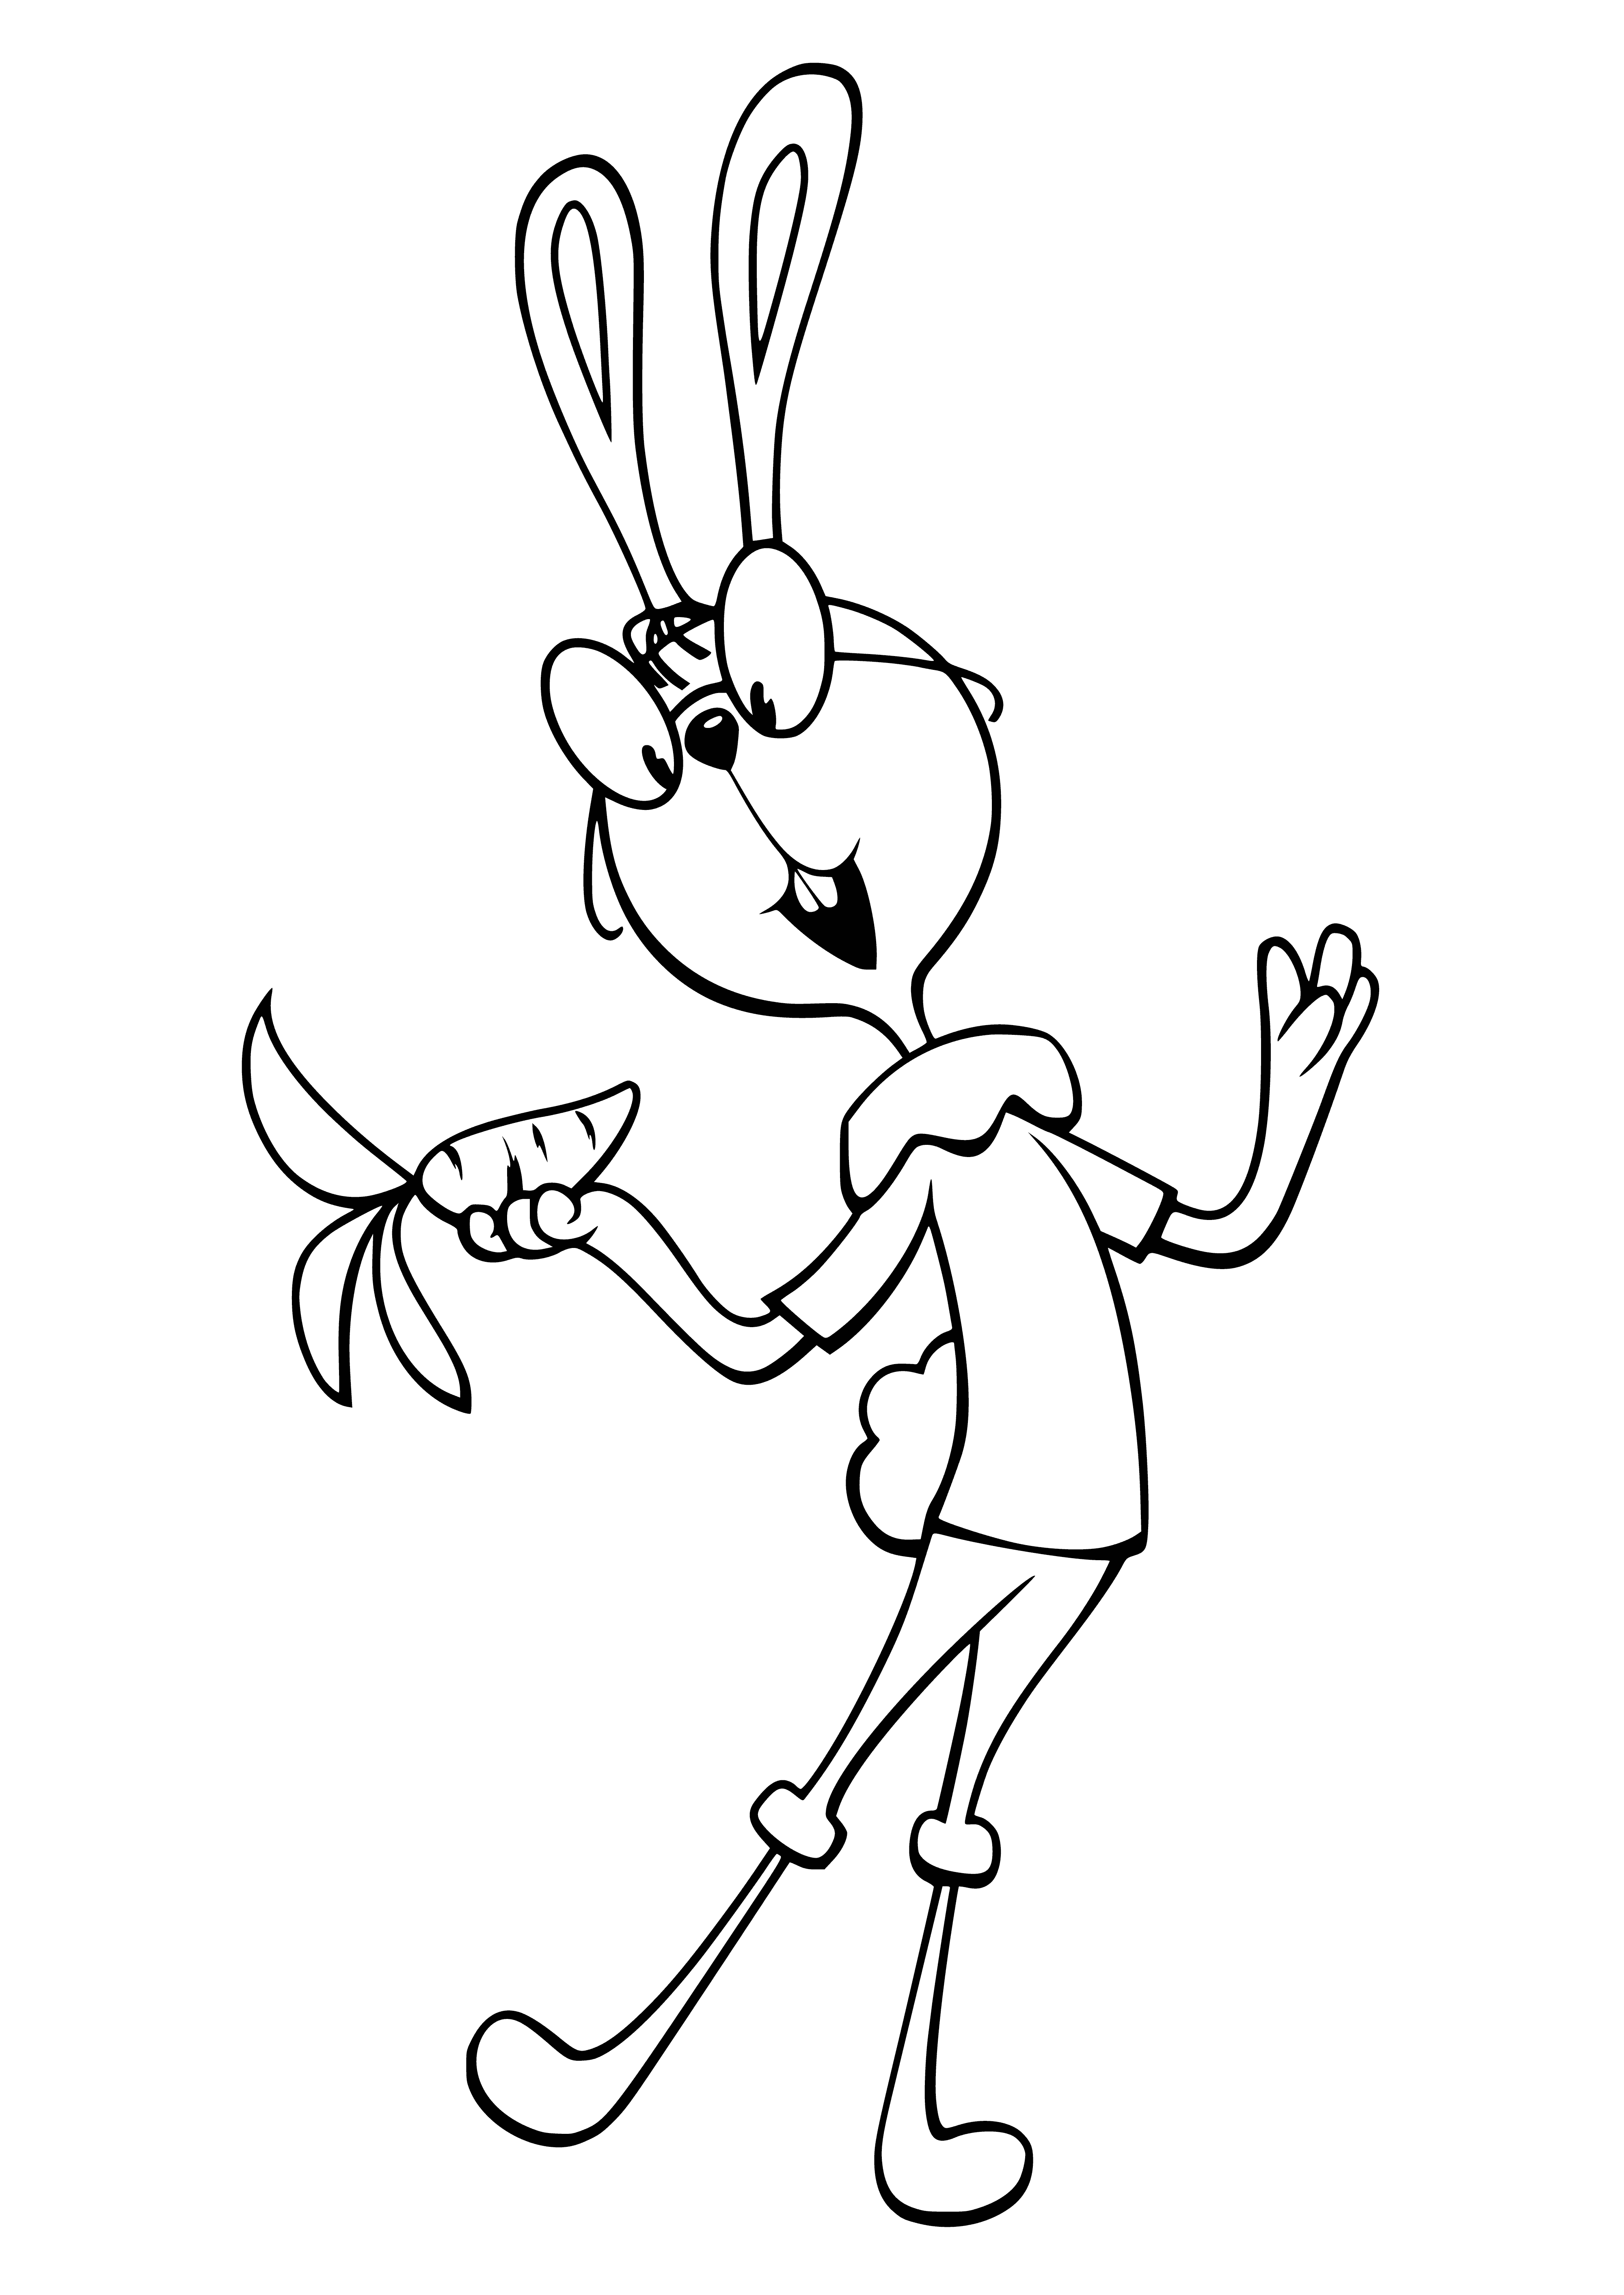 coloring page: Cute cartoon rabbit holding carrot in mouth, brown fur & big ears. Standing on hind legs. #WinnieThePooh #coloringpage